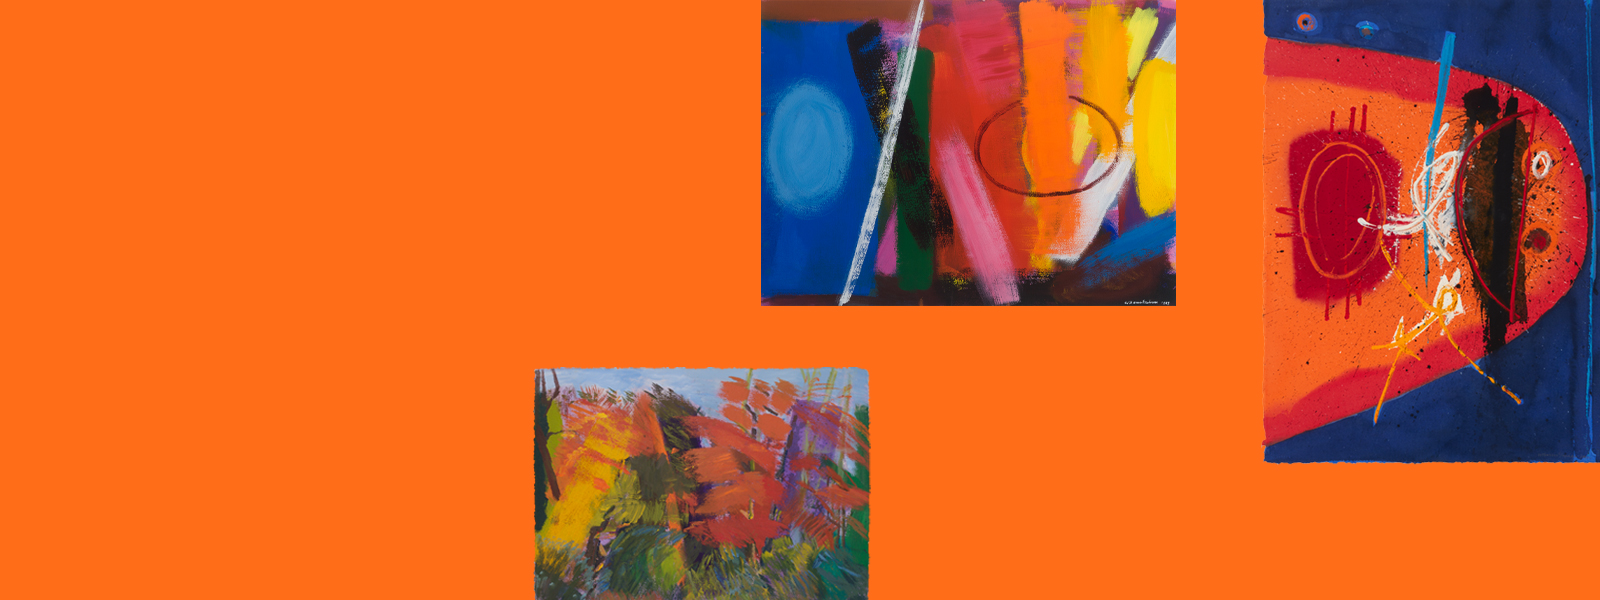 Three paintings grouped on an orange background. From left to right: an acrylic painting with short brushstrokes back and forth representing trees in greens, oranges, yellows and purple on a blue background; an acrylic painting with an abstract composition of vertical brushstrokes in bright colours on a brown background; an acrylic painting with dark blue background and semi circular shape across most of composition in orange with thick red outline, on top red, black and white marks.